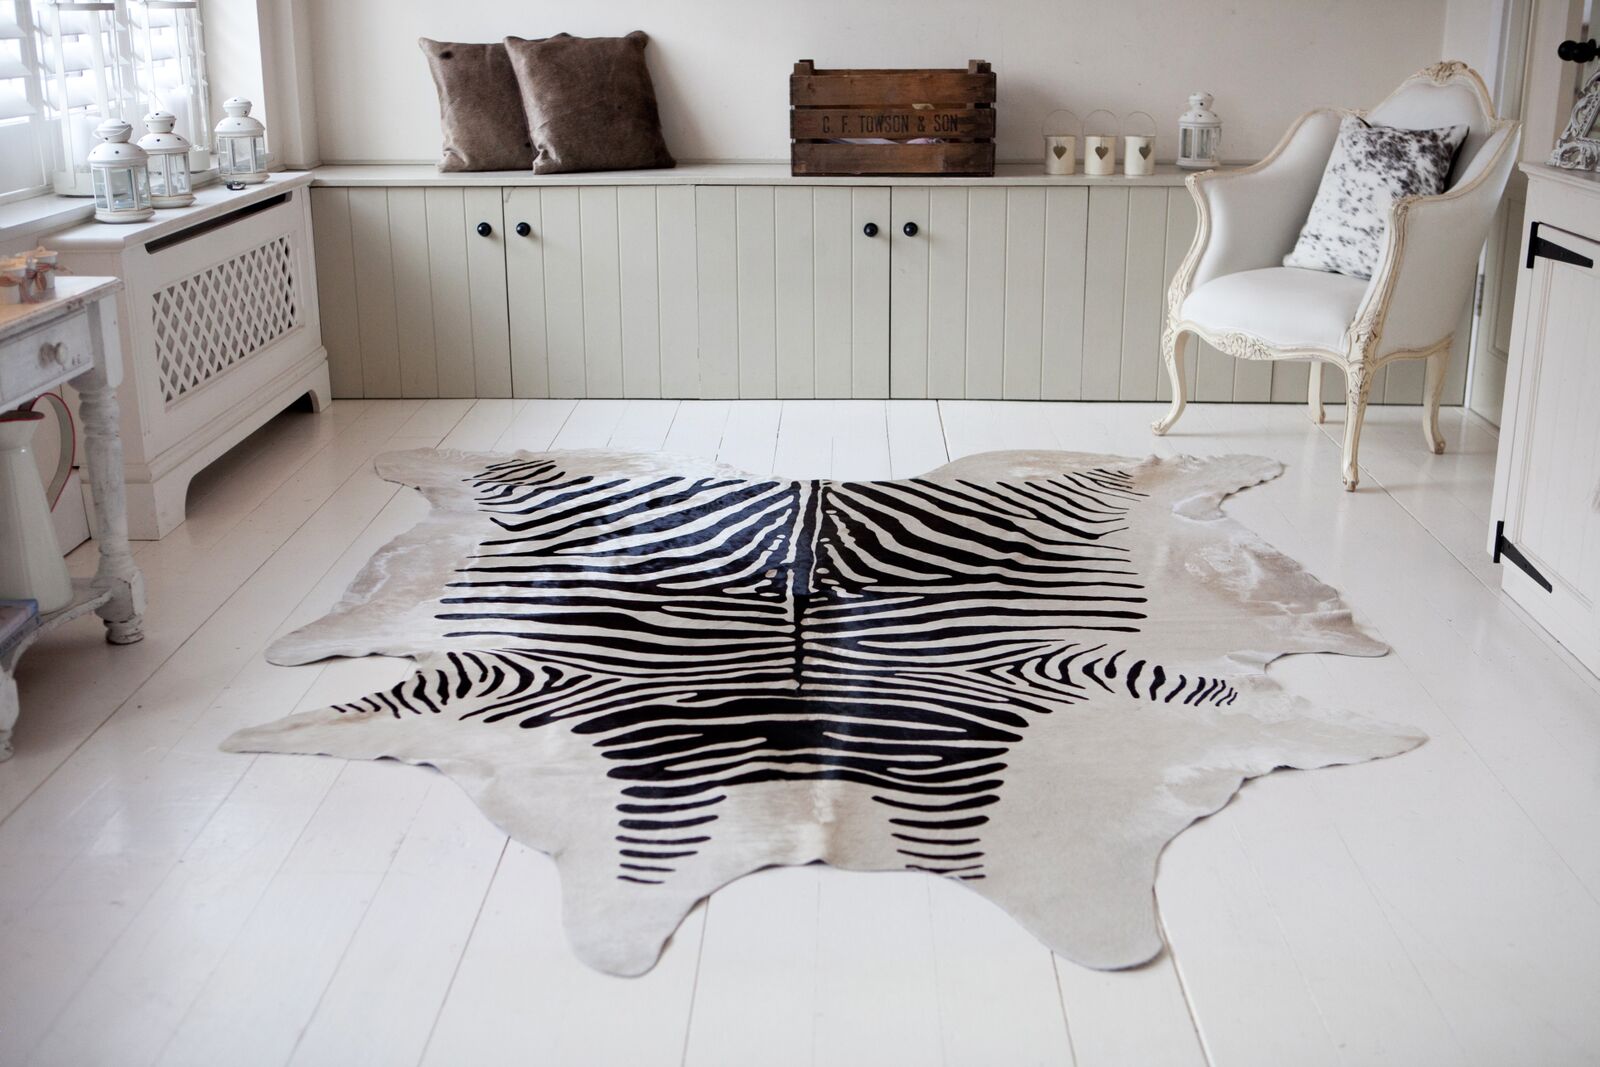 Take A Walk On The Wild Side With A Zebra Print Cowhide City Cows